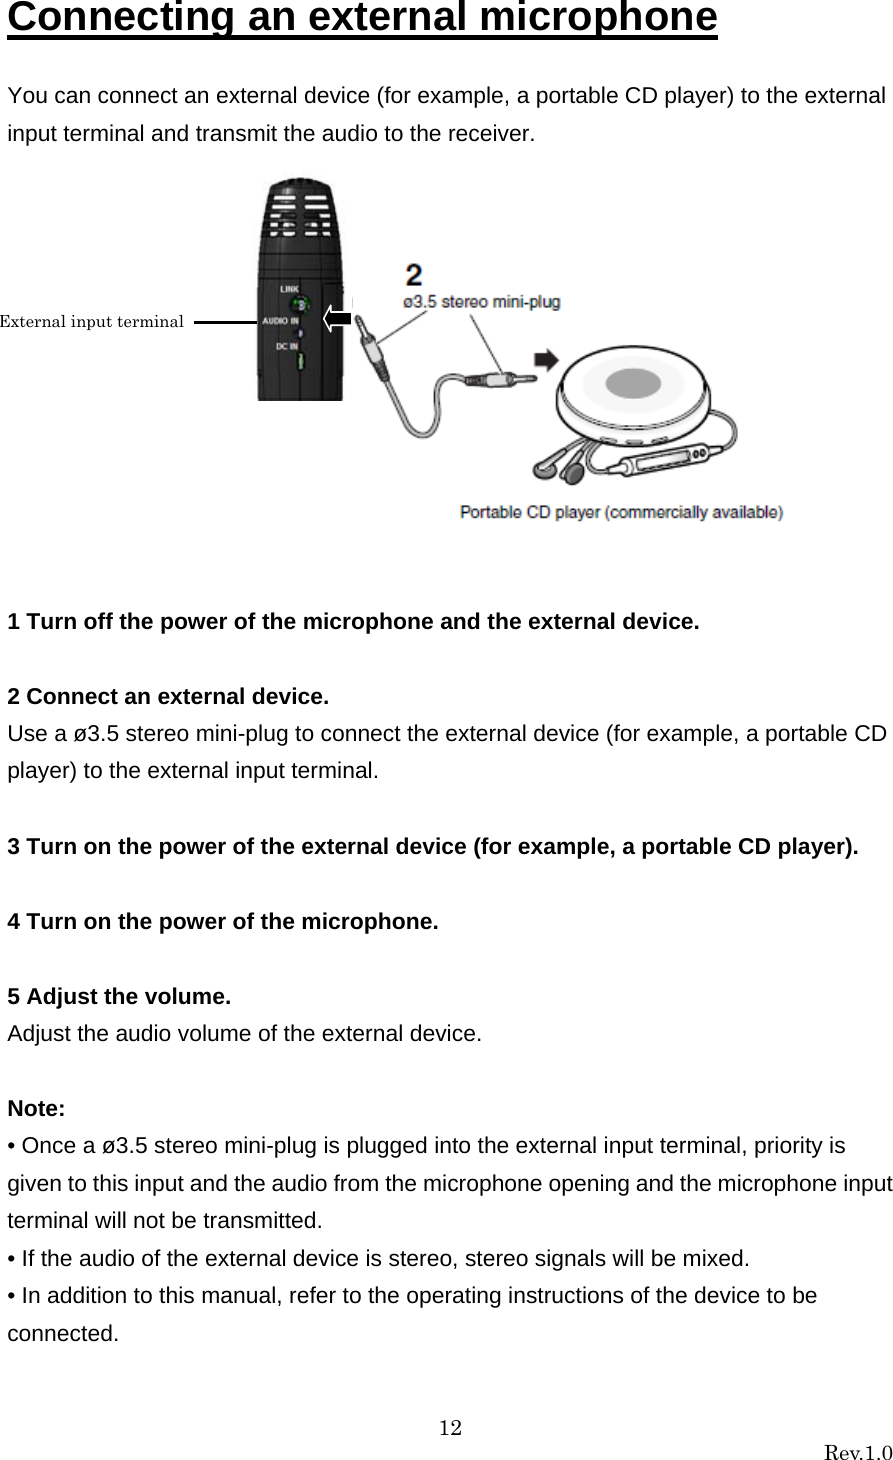 12 Rev.1.0  Connecting an external microphone  You can connect an external device (for example, a portable CD player) to the external input terminal and transmit the audio to the receiver.             1 Turn off the power of the microphone and the external device.  2 Connect an external device. Use a ø3.5 stereo mini-plug to connect the external device (for example, a portable CD player) to the external input terminal.  3 Turn on the power of the external device (for example, a portable CD player).  4 Turn on the power of the microphone.  5 Adjust the volume. Adjust the audio volume of the external device.  Note: • Once a ø3.5 stereo mini-plug is plugged into the external input terminal, priority is given to this input and the audio from the microphone opening and the microphone input terminal will not be transmitted. • If the audio of the external device is stereo, stereo signals will be mixed. • In addition to this manual, refer to the operating instructions of the device to be connected. External input terminal 